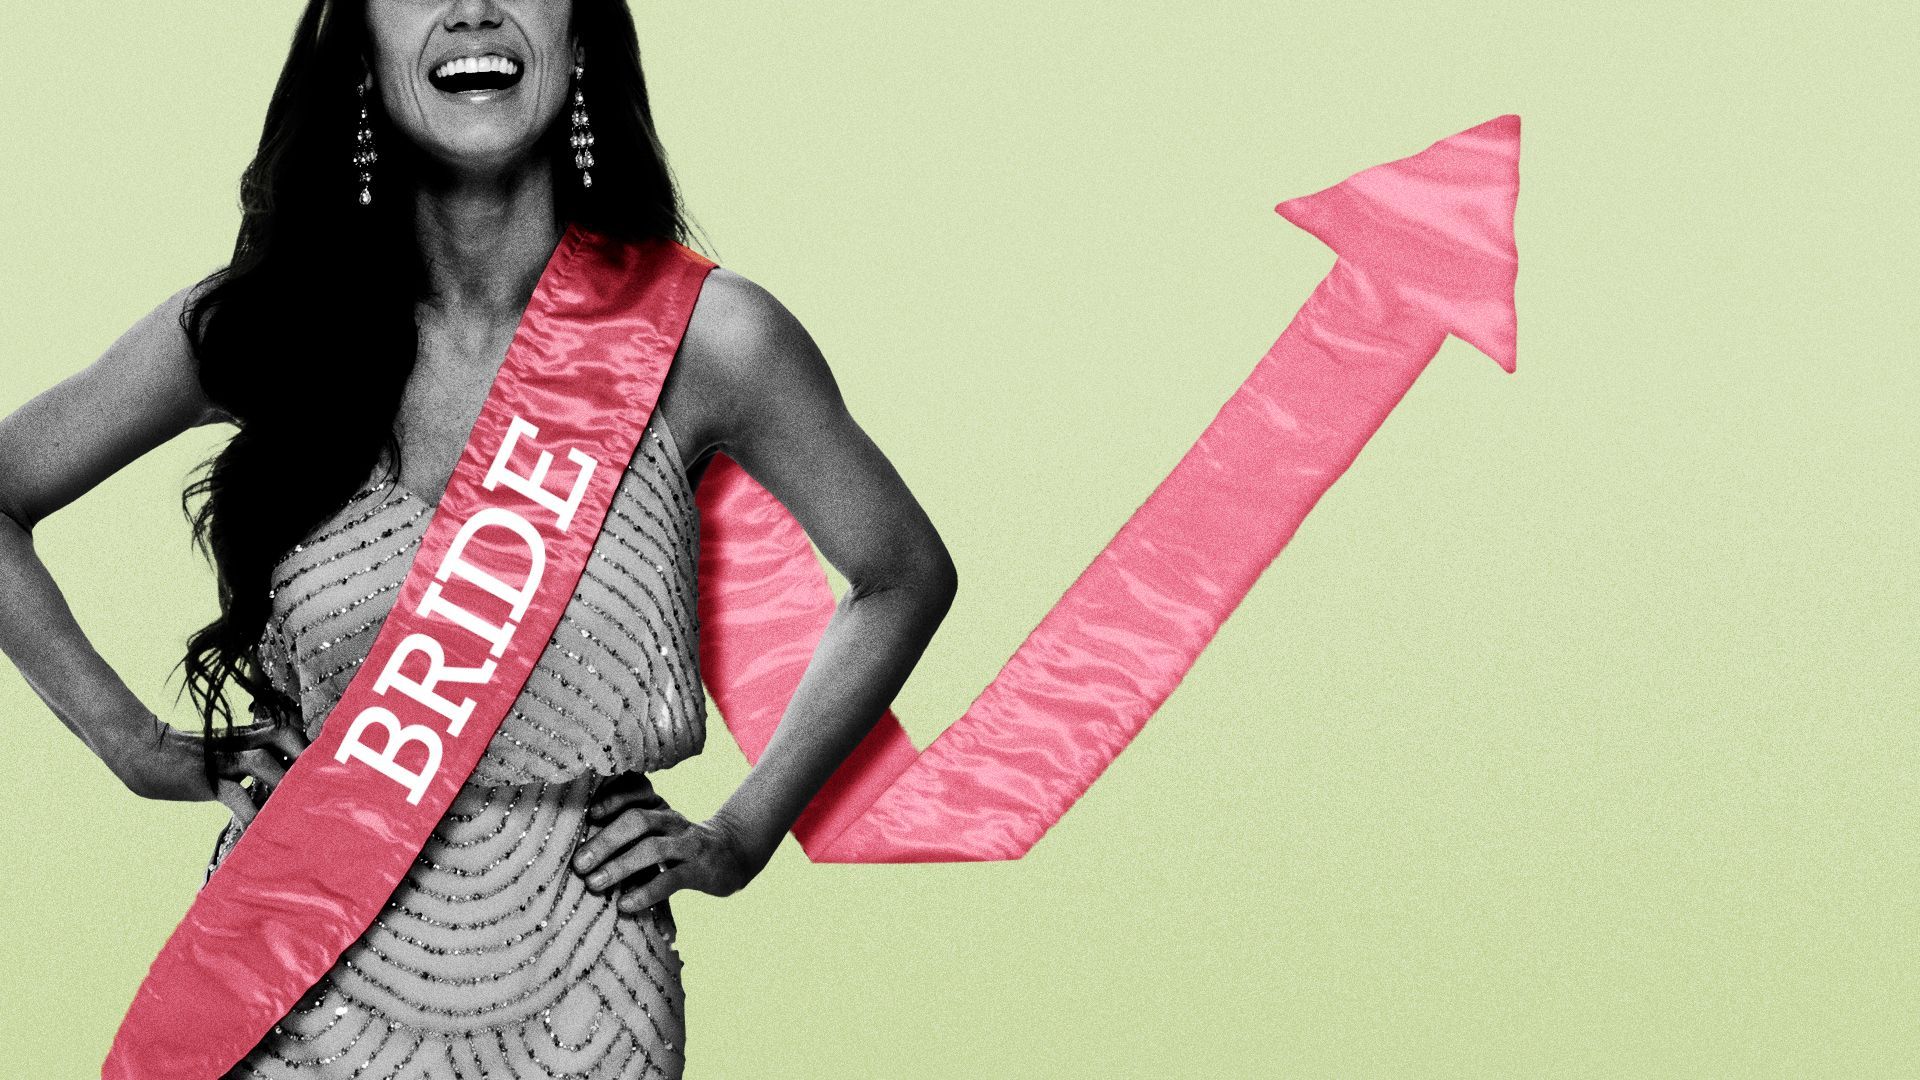 Illustration of a woman wearing a pink sash that says "bride" as it wraps around her and forms an upward arrow. 